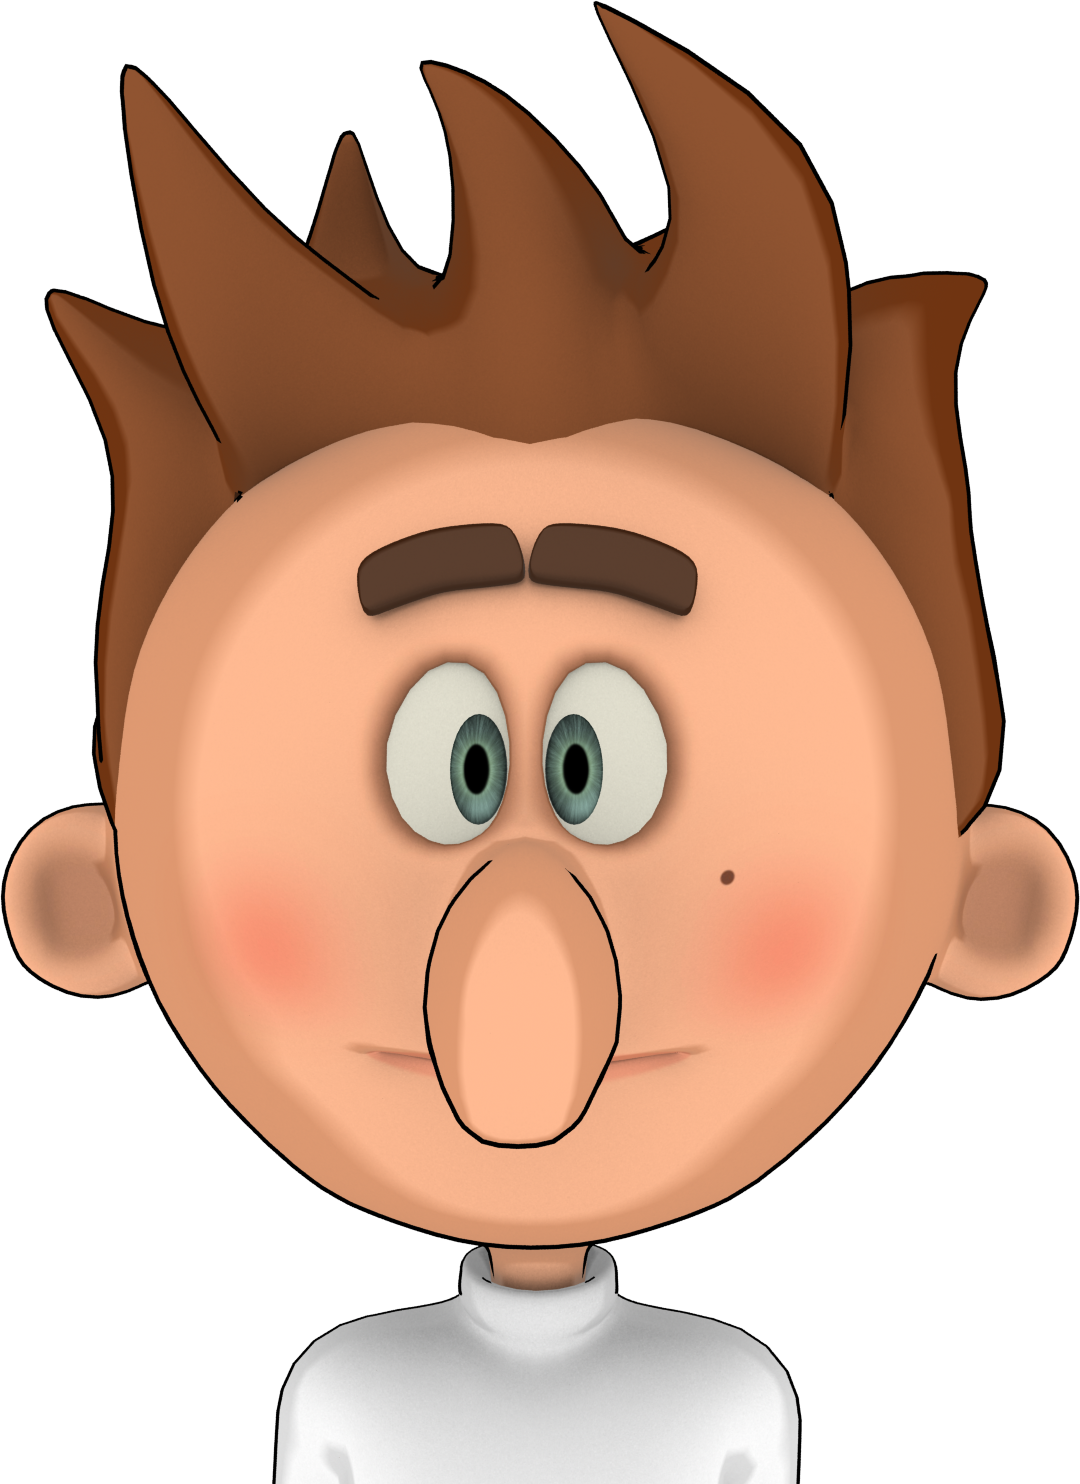 ... Funny face clipart ...